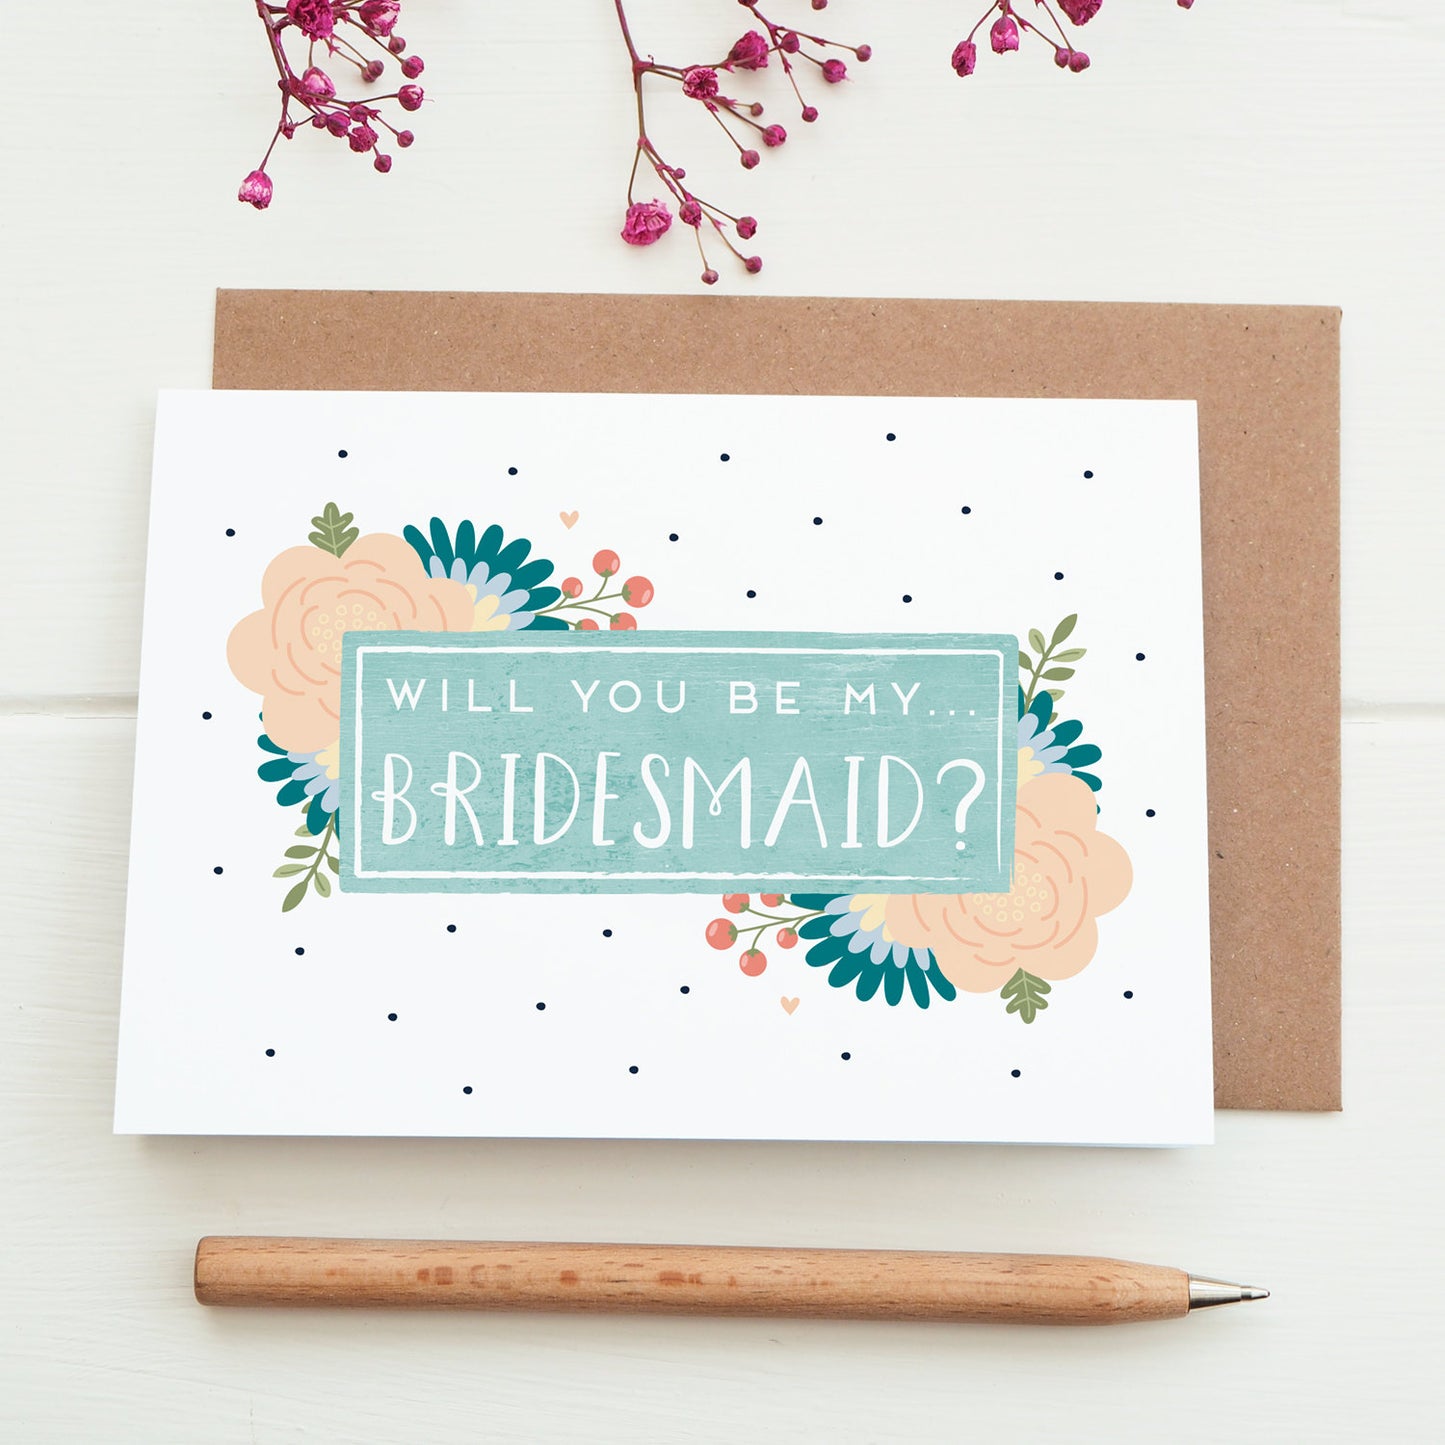 Will you be my bridesmaid card in blue